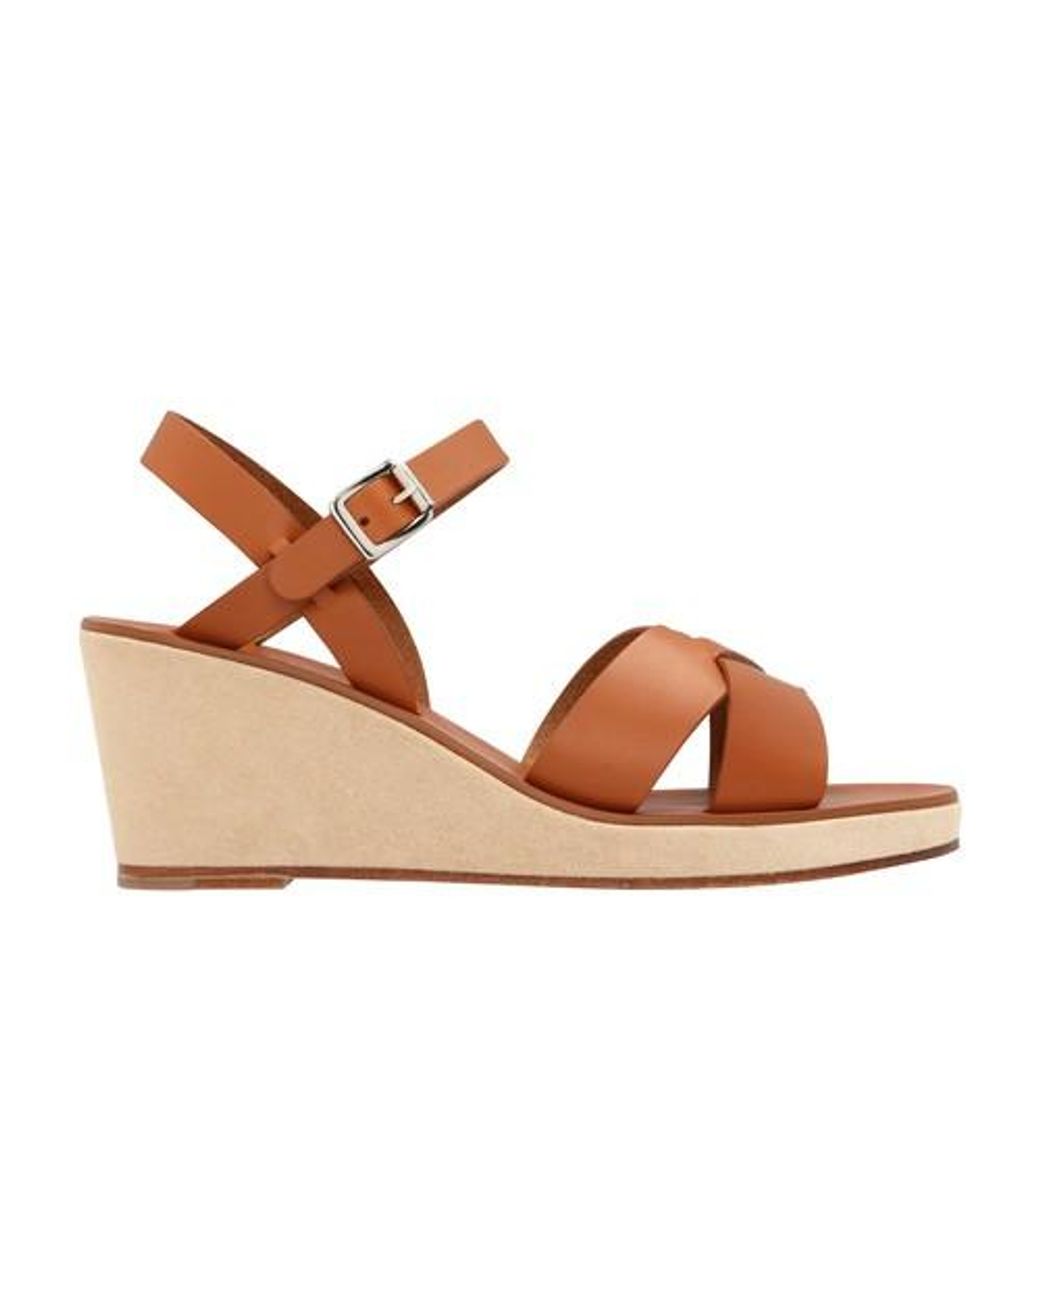 A.P.C. Judith Sandals in Brown - Lyst